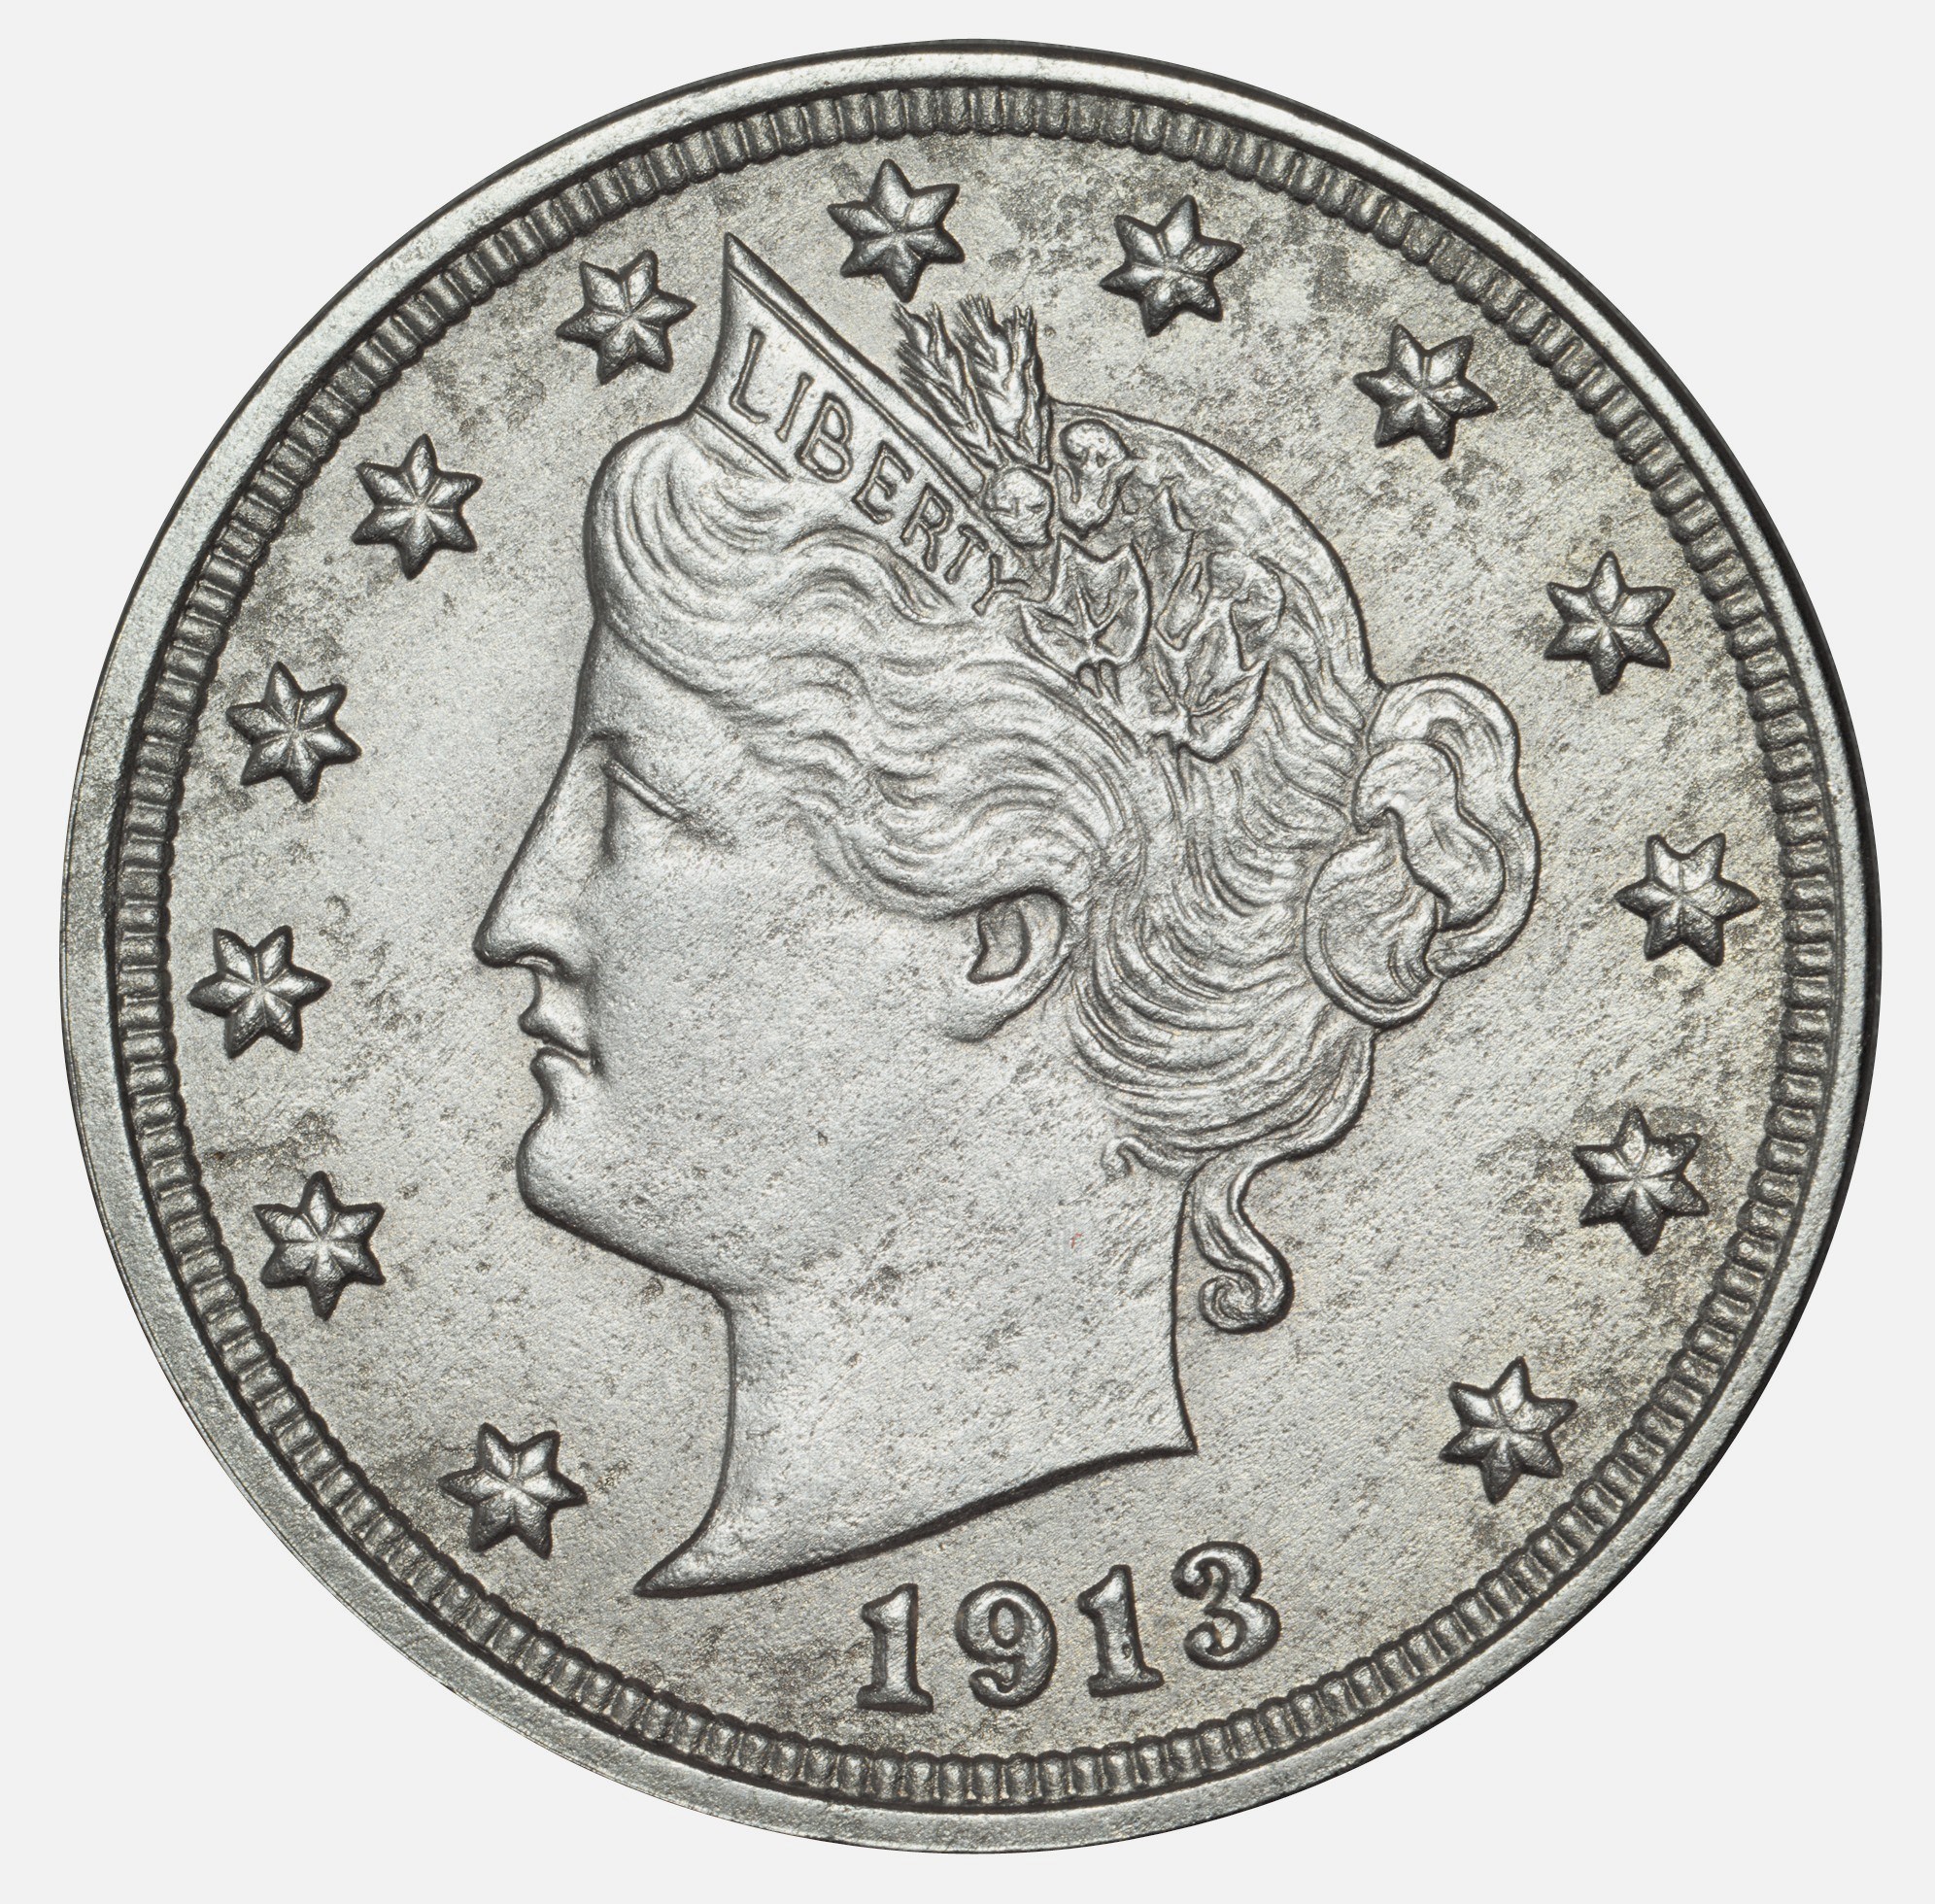 Complimentary Appraisals For The Public And See 1 Billion Of - insured for 2 5 million this famous 1913 liberty head nickel is one of only five known and will be displayed at the 2014 national money show in atlanta